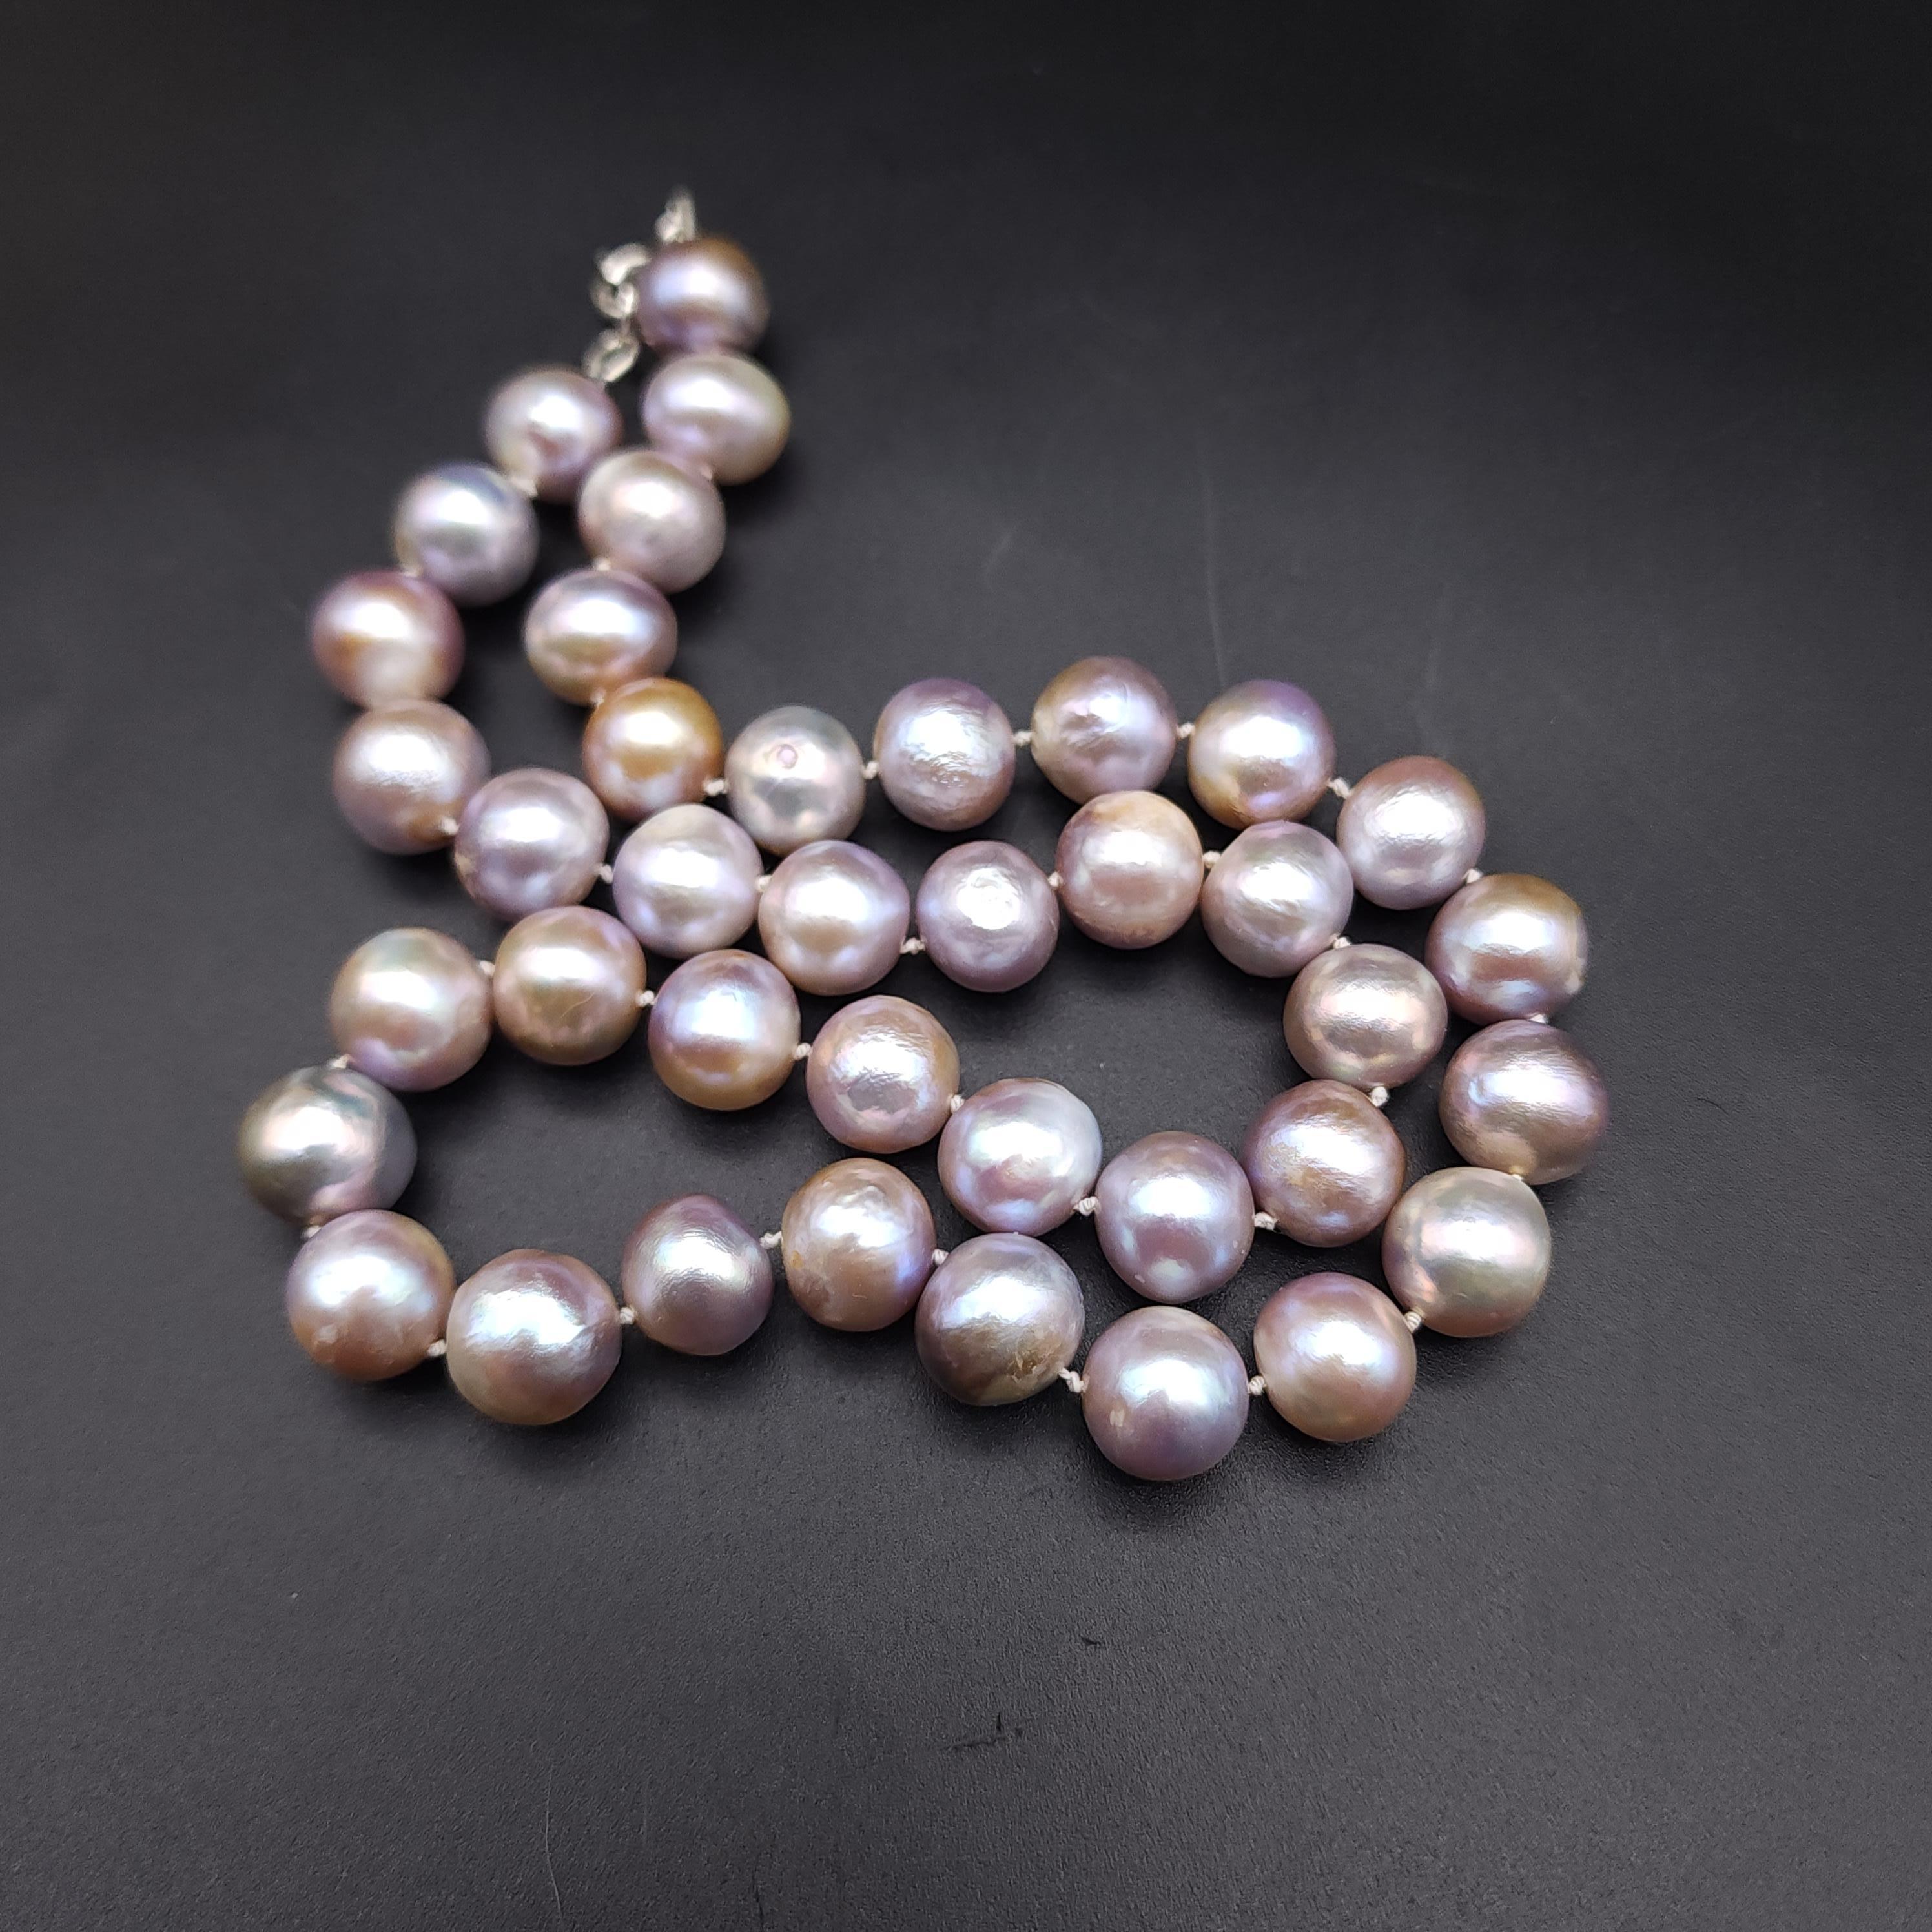 Retro Vintage Lavender Pearl Collar Necklace with Sterling Silver Accents, Clasp For Sale